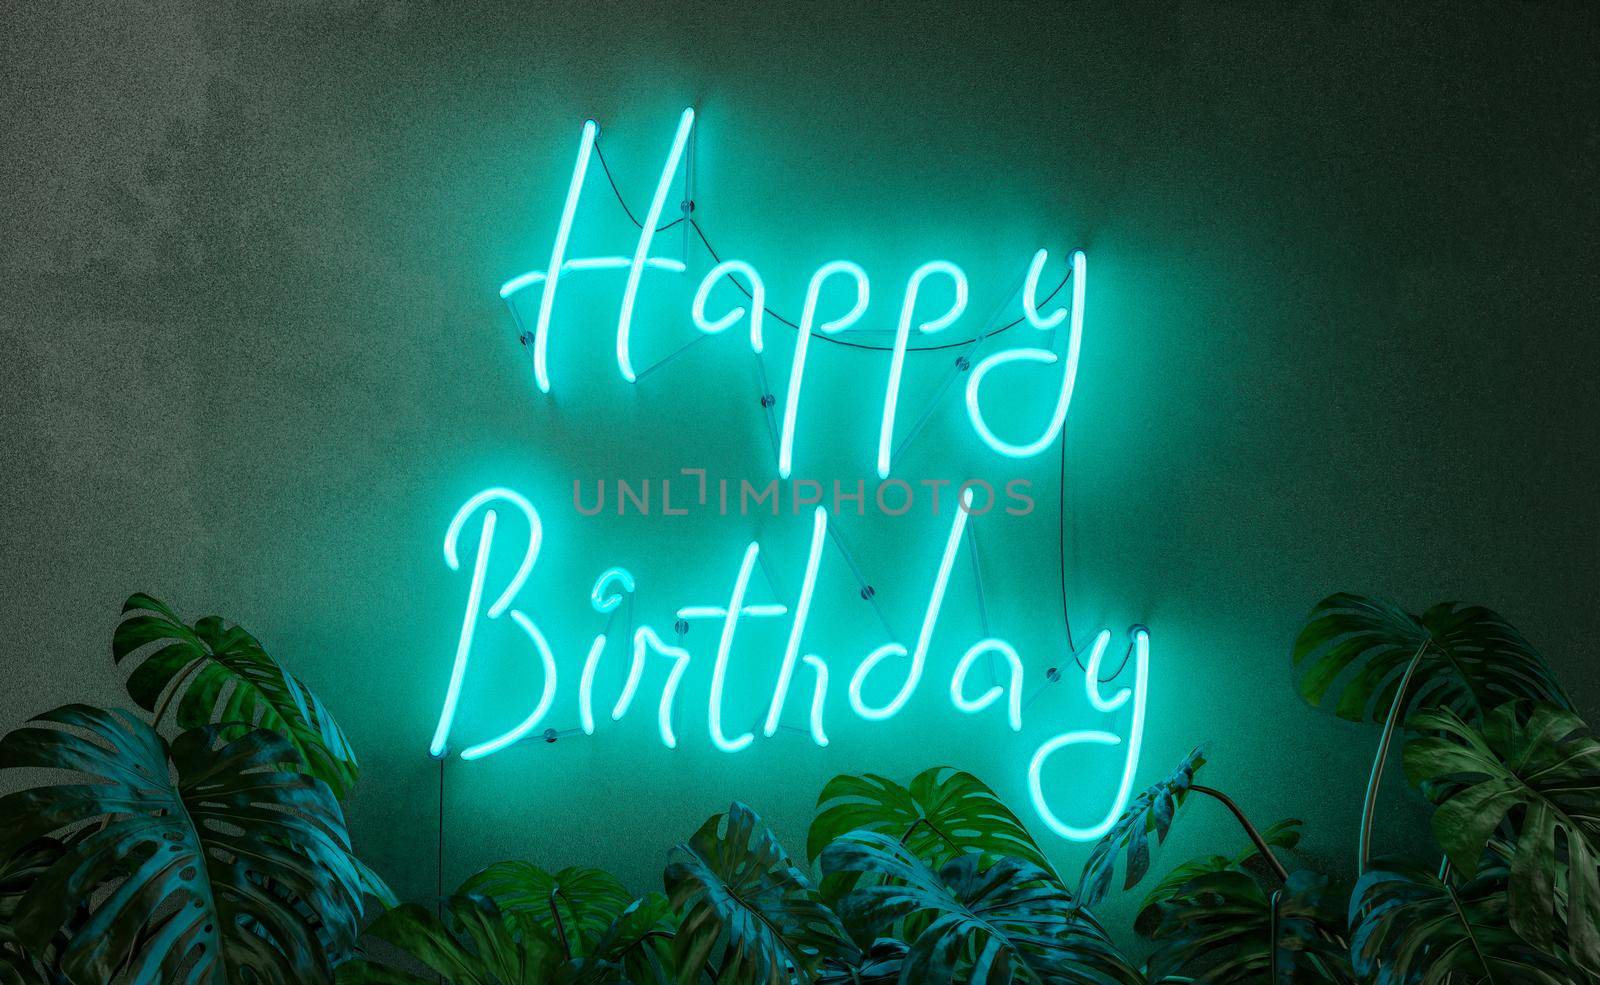 Happy birthday neon sign with plants in front by asolano